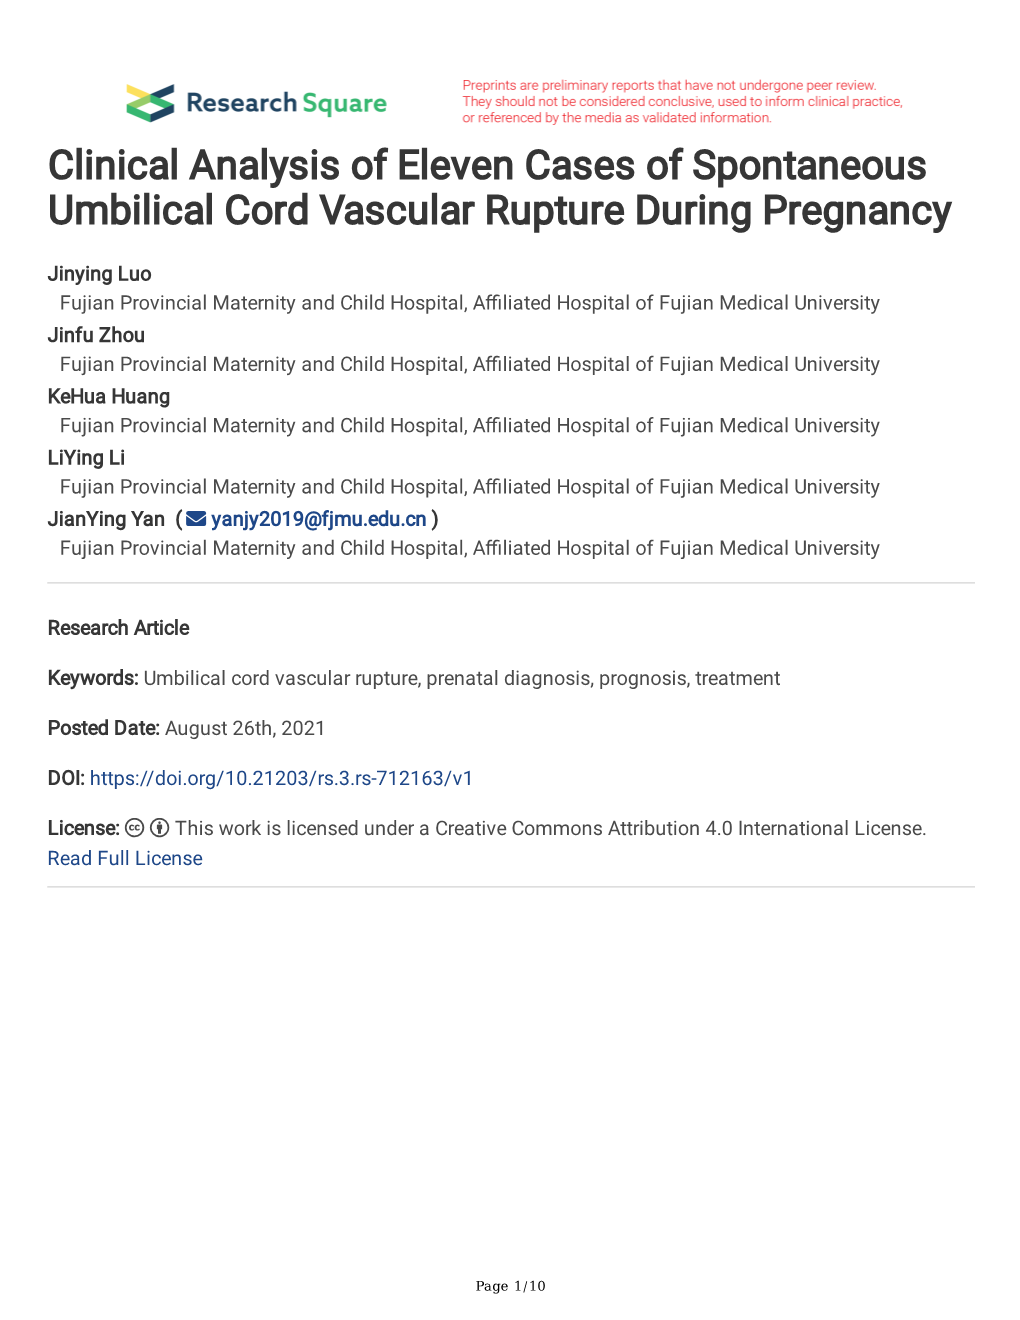 Clinical Analysis of Eleven Cases of Spontaneous Umbilical Cord Vascular Rupture During Pregnancy